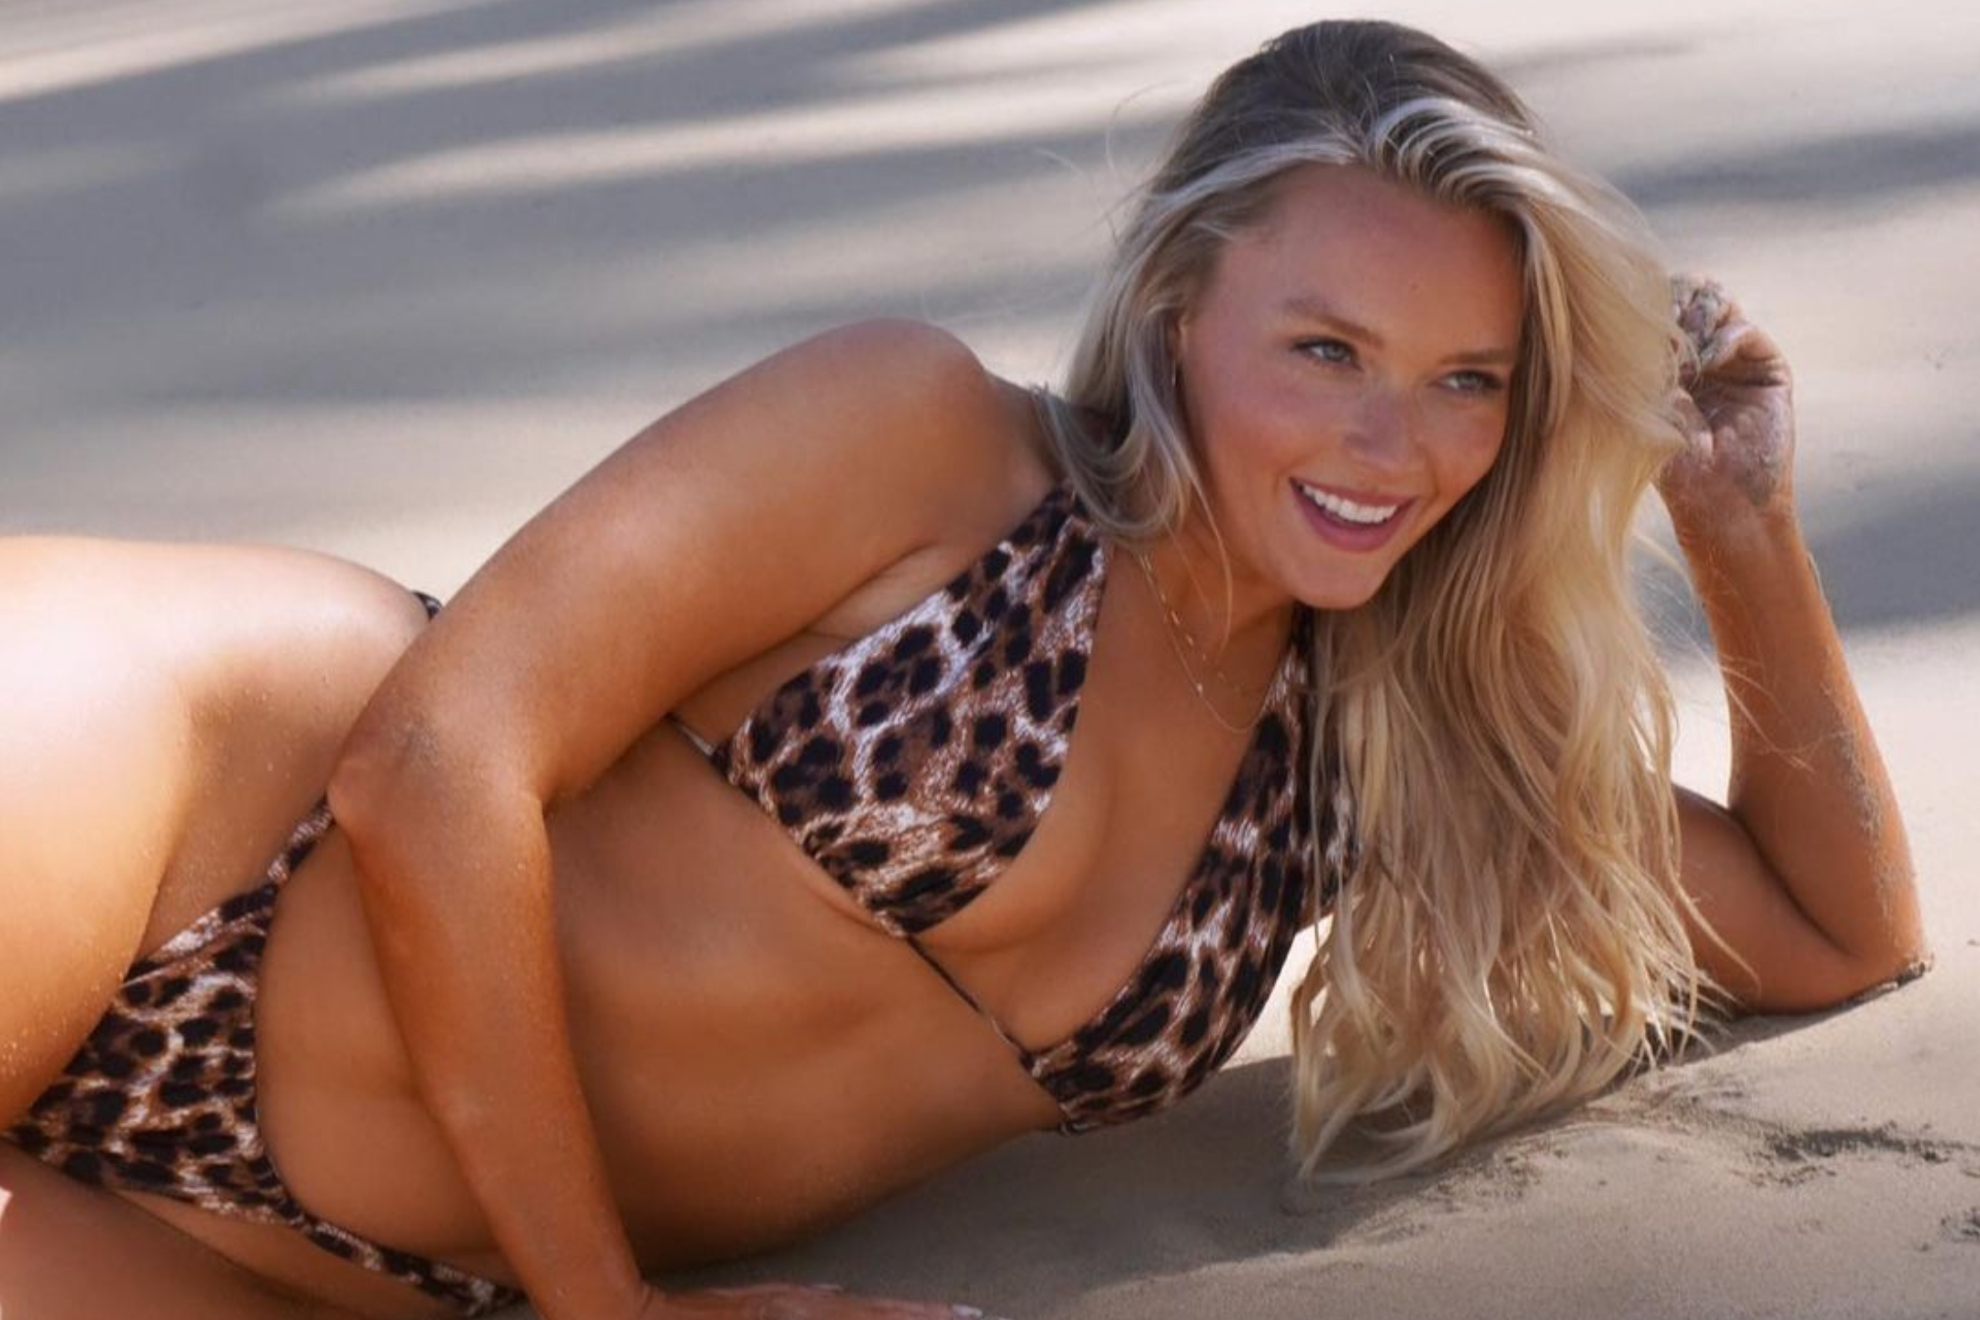 Camille Kostek in a swimsuit photoshoot for SI.